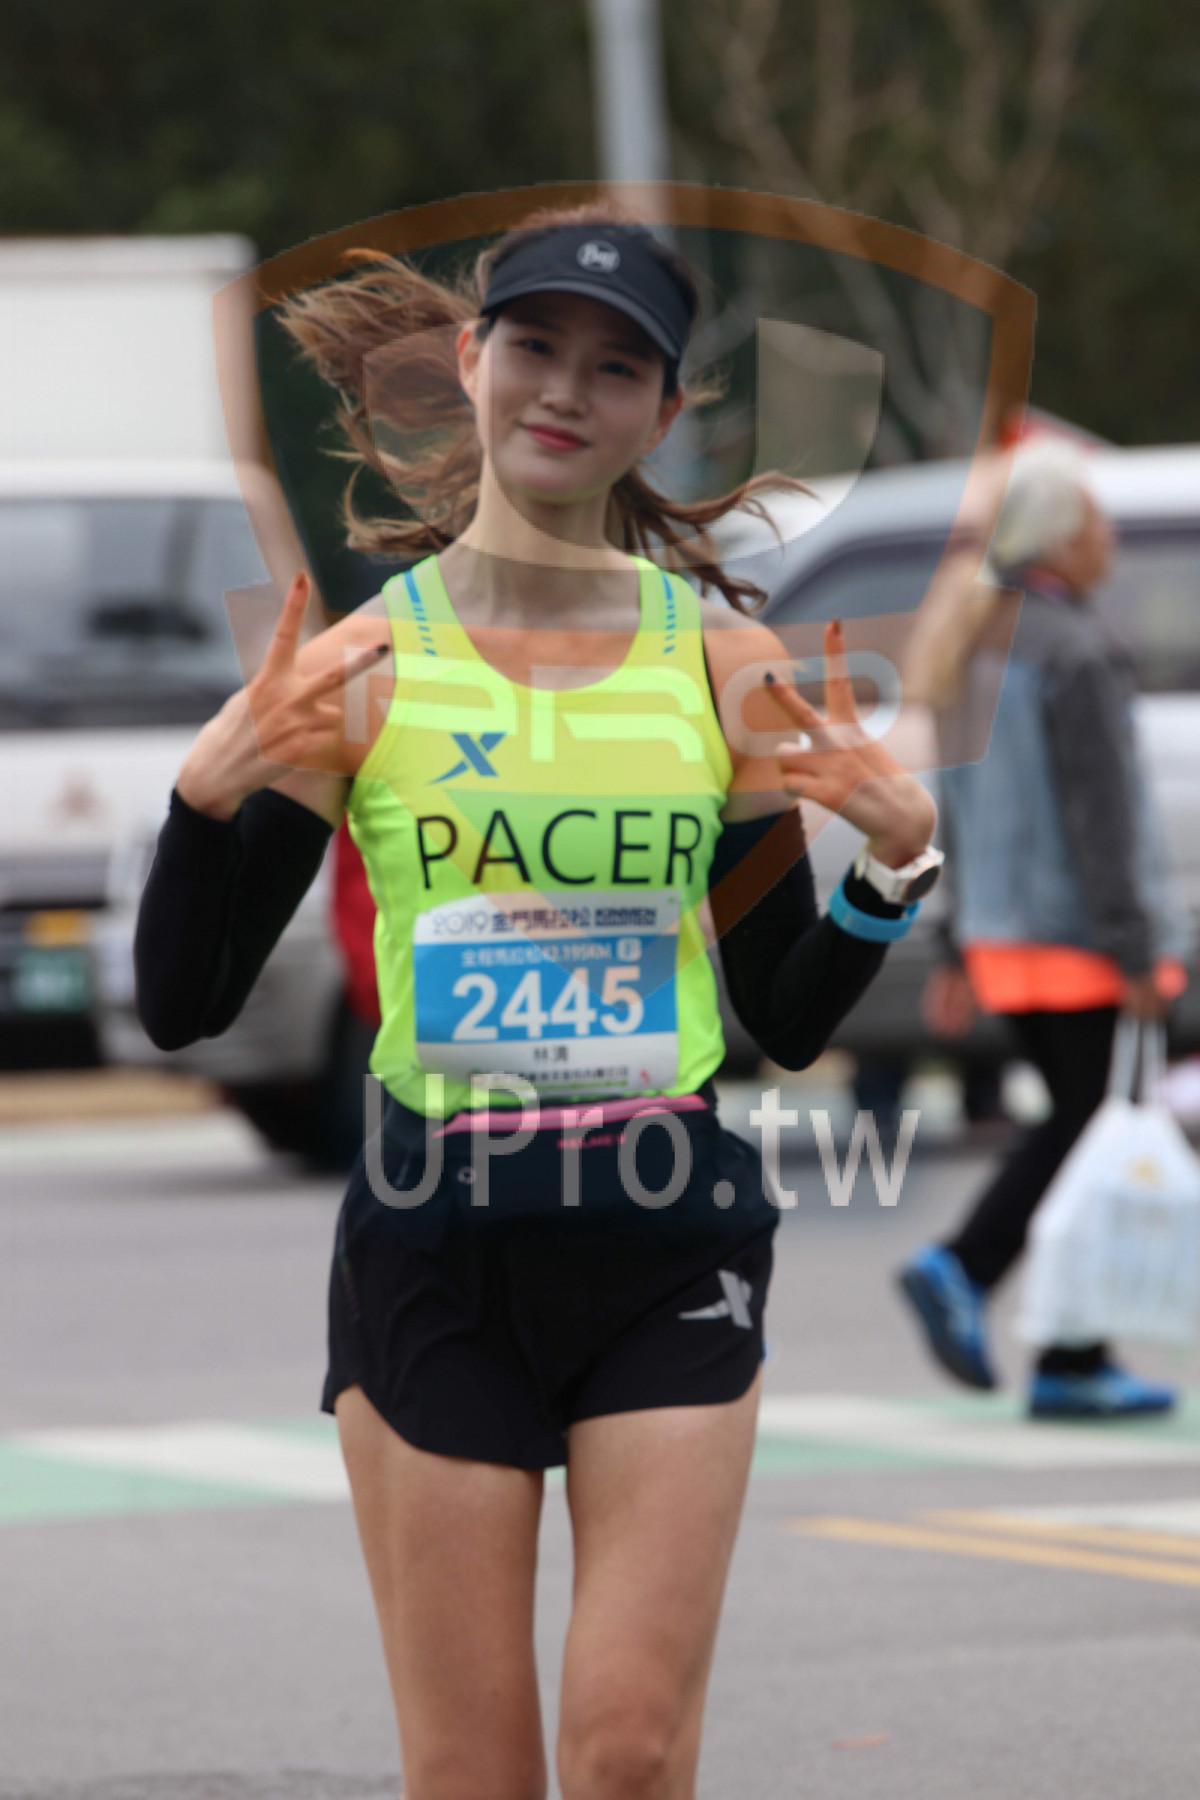 PACER,2445|